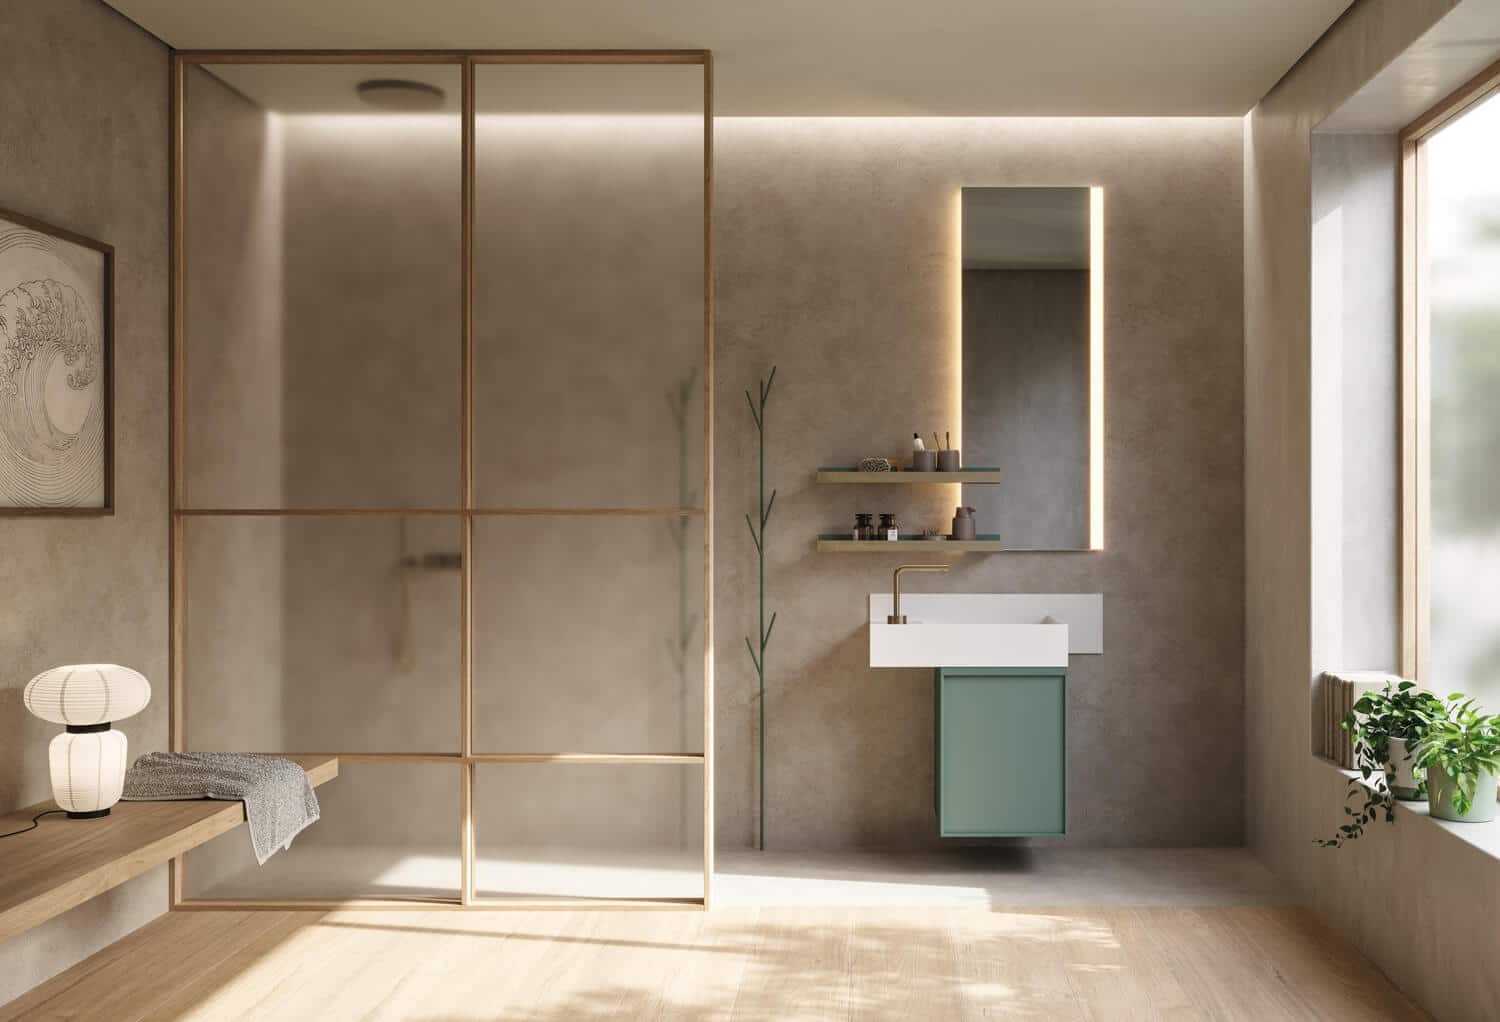 Vanity with plissé doors in Rovere Creta. The door of the tall column is in the same finish, with a structure in Piombo matte lacquer. The ten-sided mirror adds visual variety and its frame in Piombo matte lacquer brings this luxury bath design full circle.  